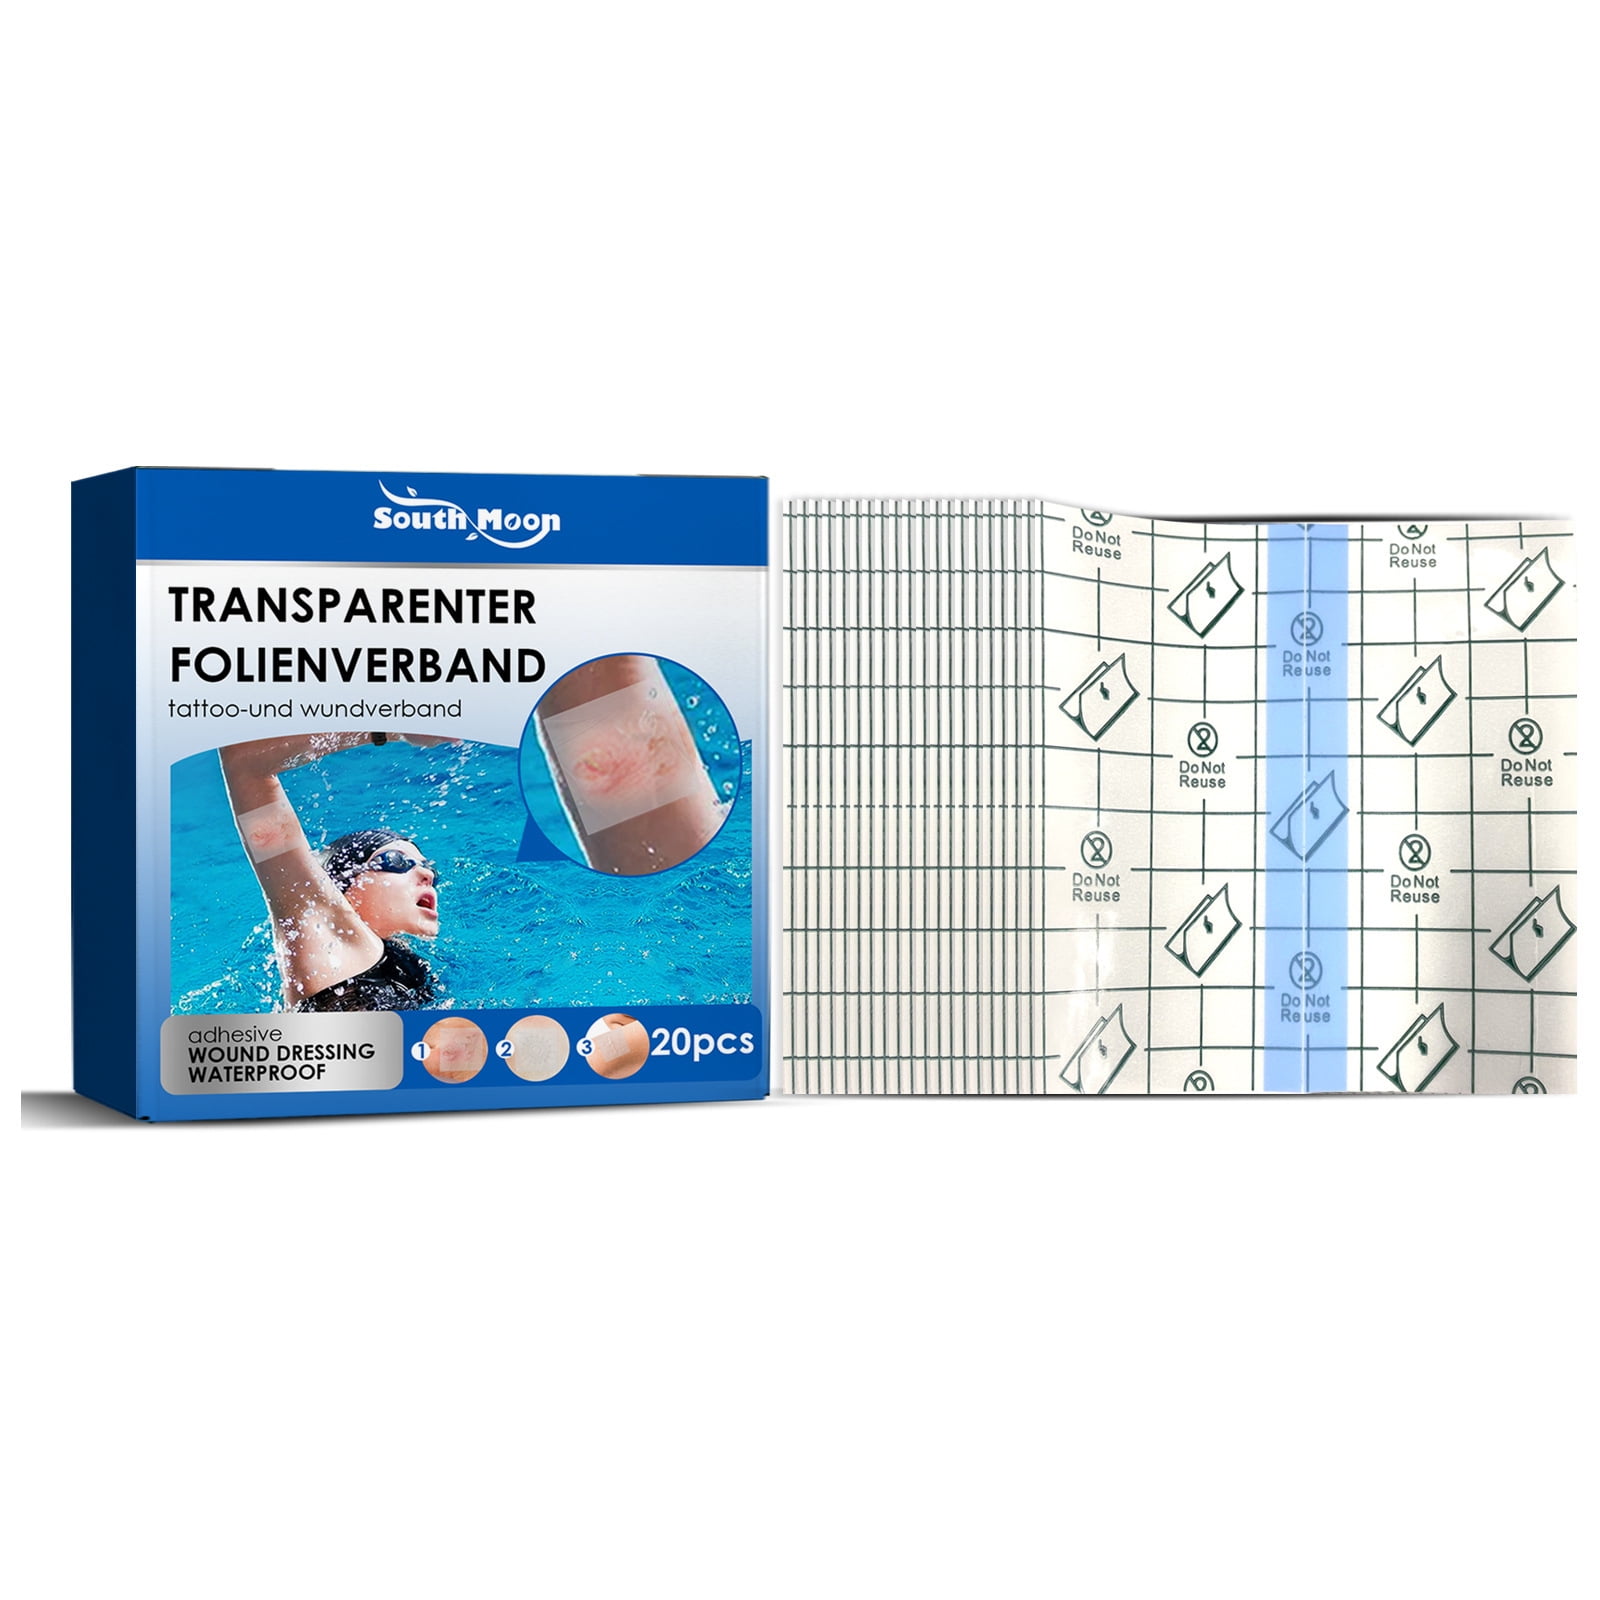 Waterproof Bandages - Large Bandages for Wound Care, Tattoos, Post Surgical  - Changes Color When Wet (4x4) - 20Count 